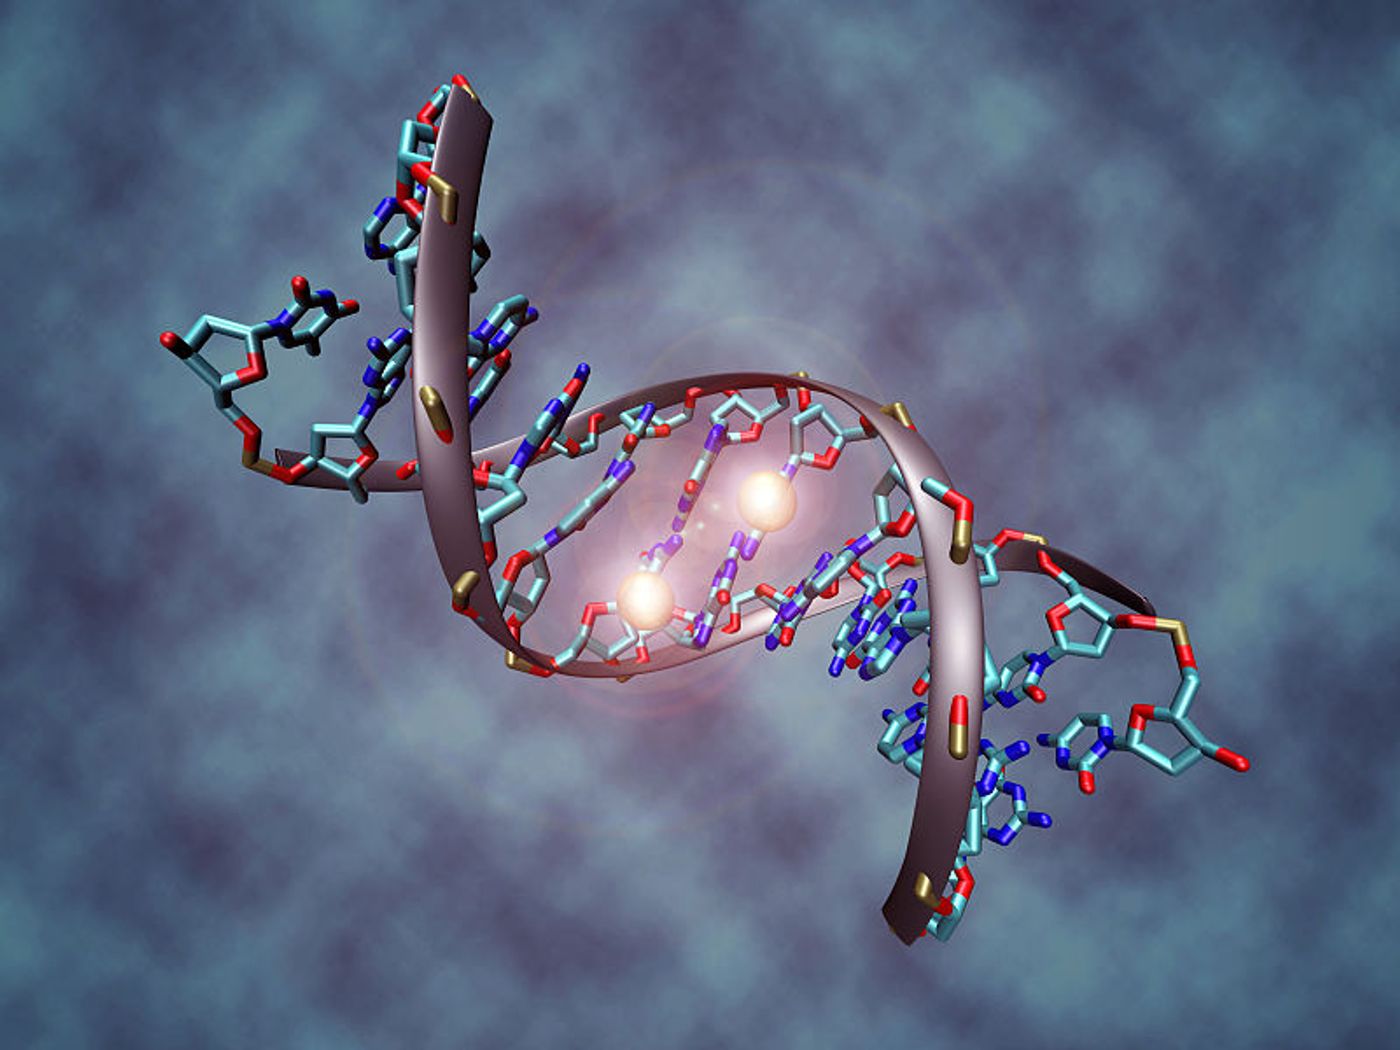 A DNA molecule methylated on both strands on the center cytosine. DNA methylation plays an important role for epigenetic gene regulation in development and cancer. Credit: Christoph Bock, Max Planck Institute for Informatics